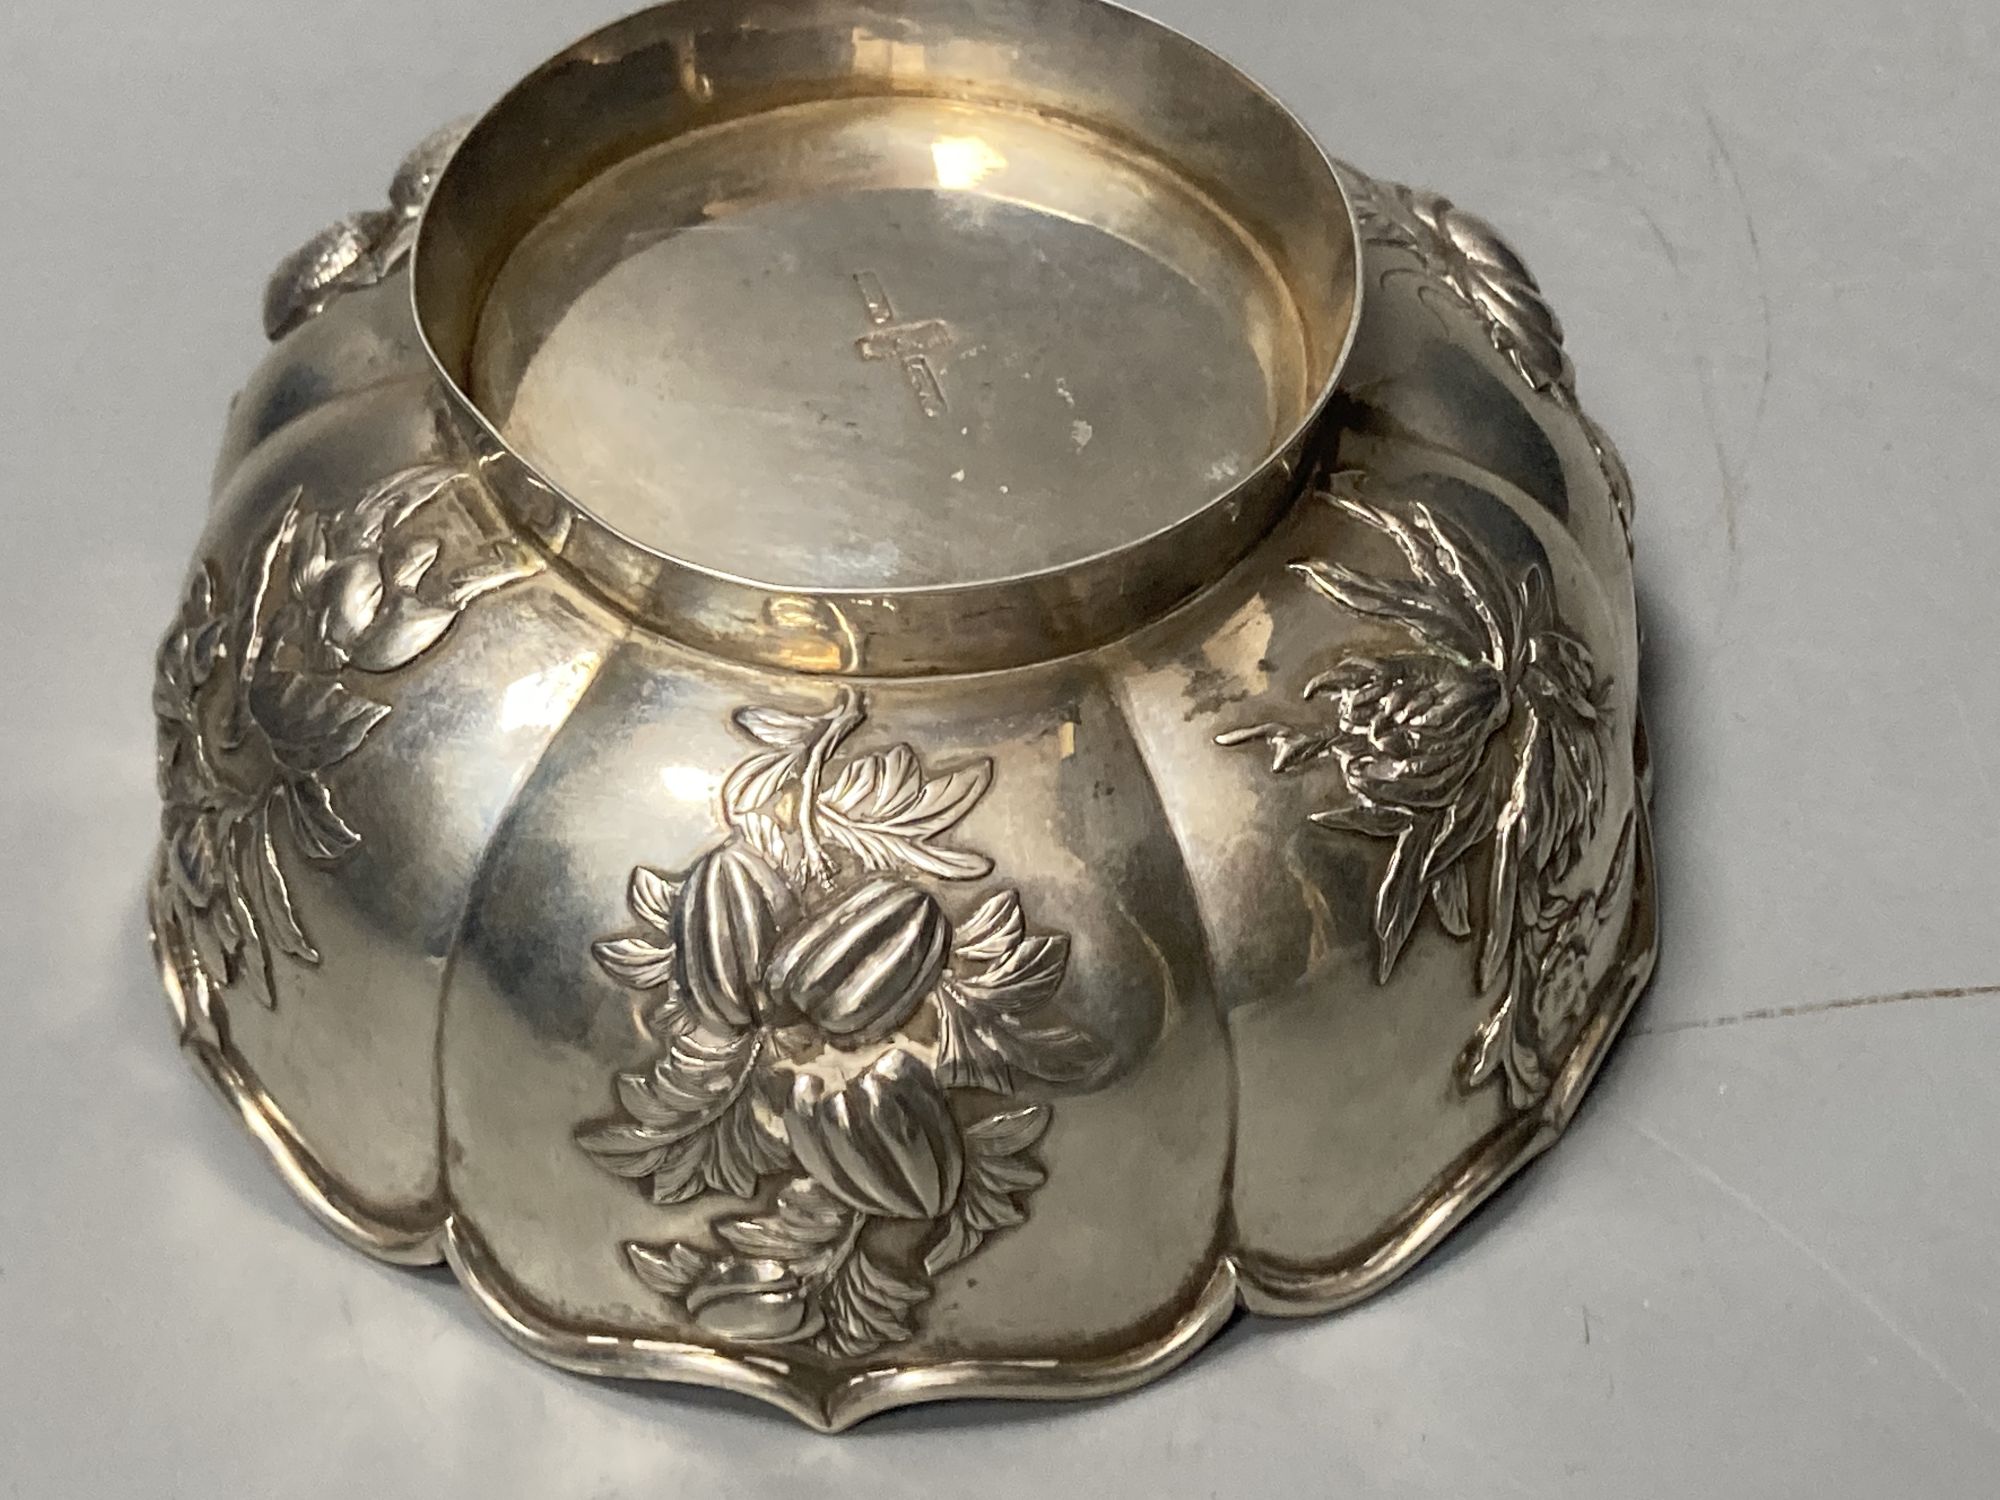 An early 20th century Chinese Export white metal bowl, by Zee Wo, with foliate decoration, diameter 11.5cm, 5.5oz.